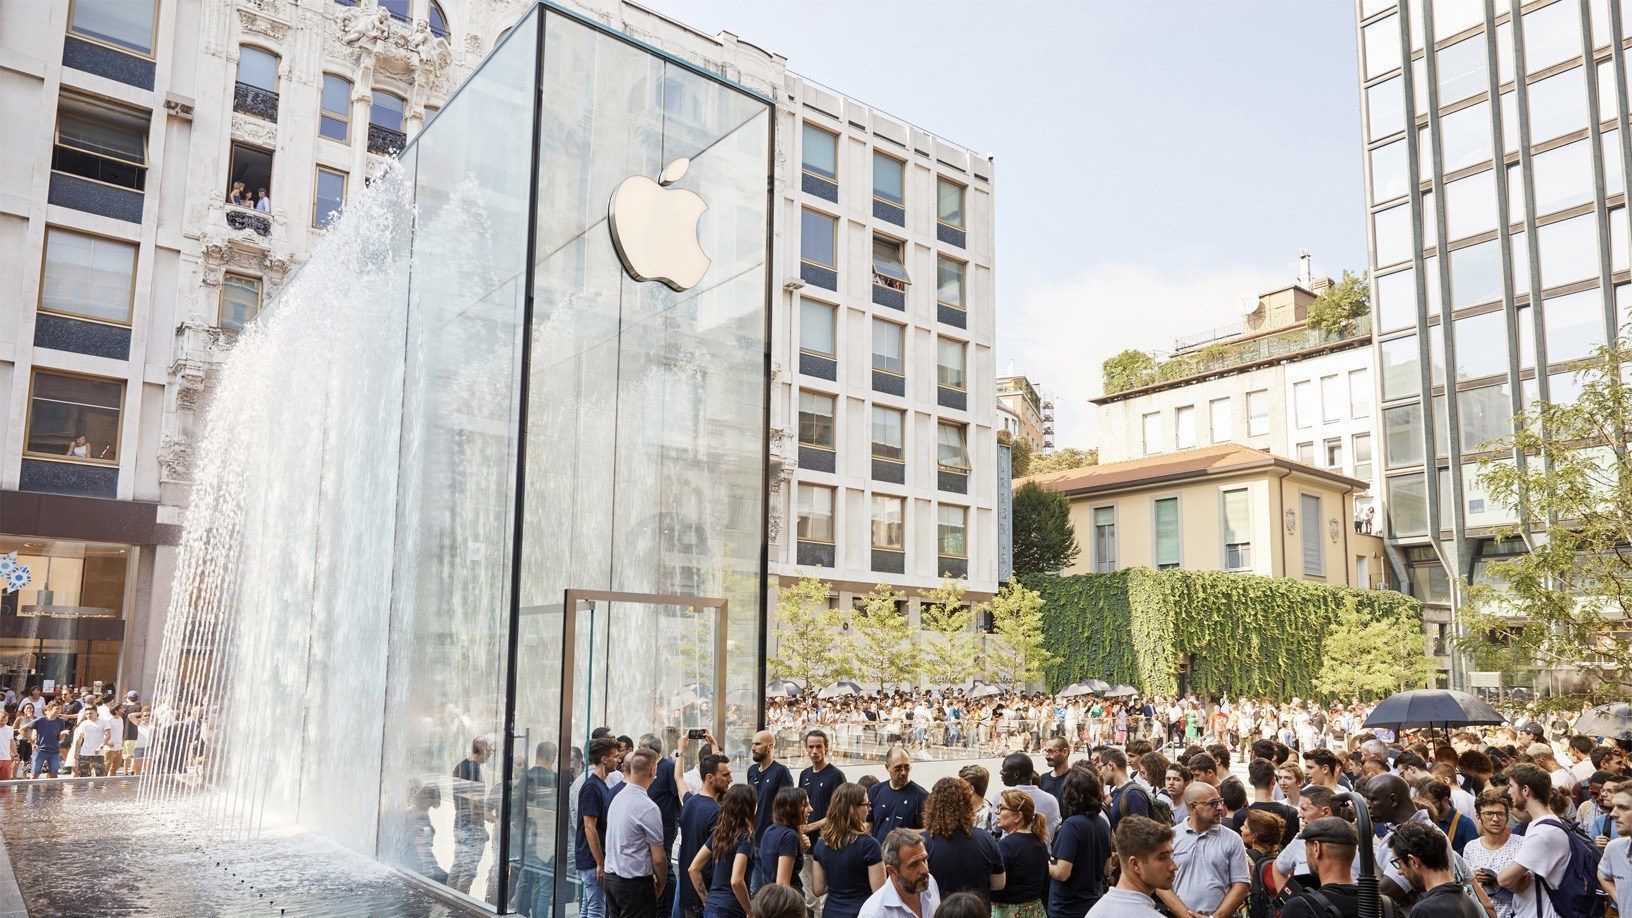 Apple Closes All Retail Stores in Italy Due to Coronavirus